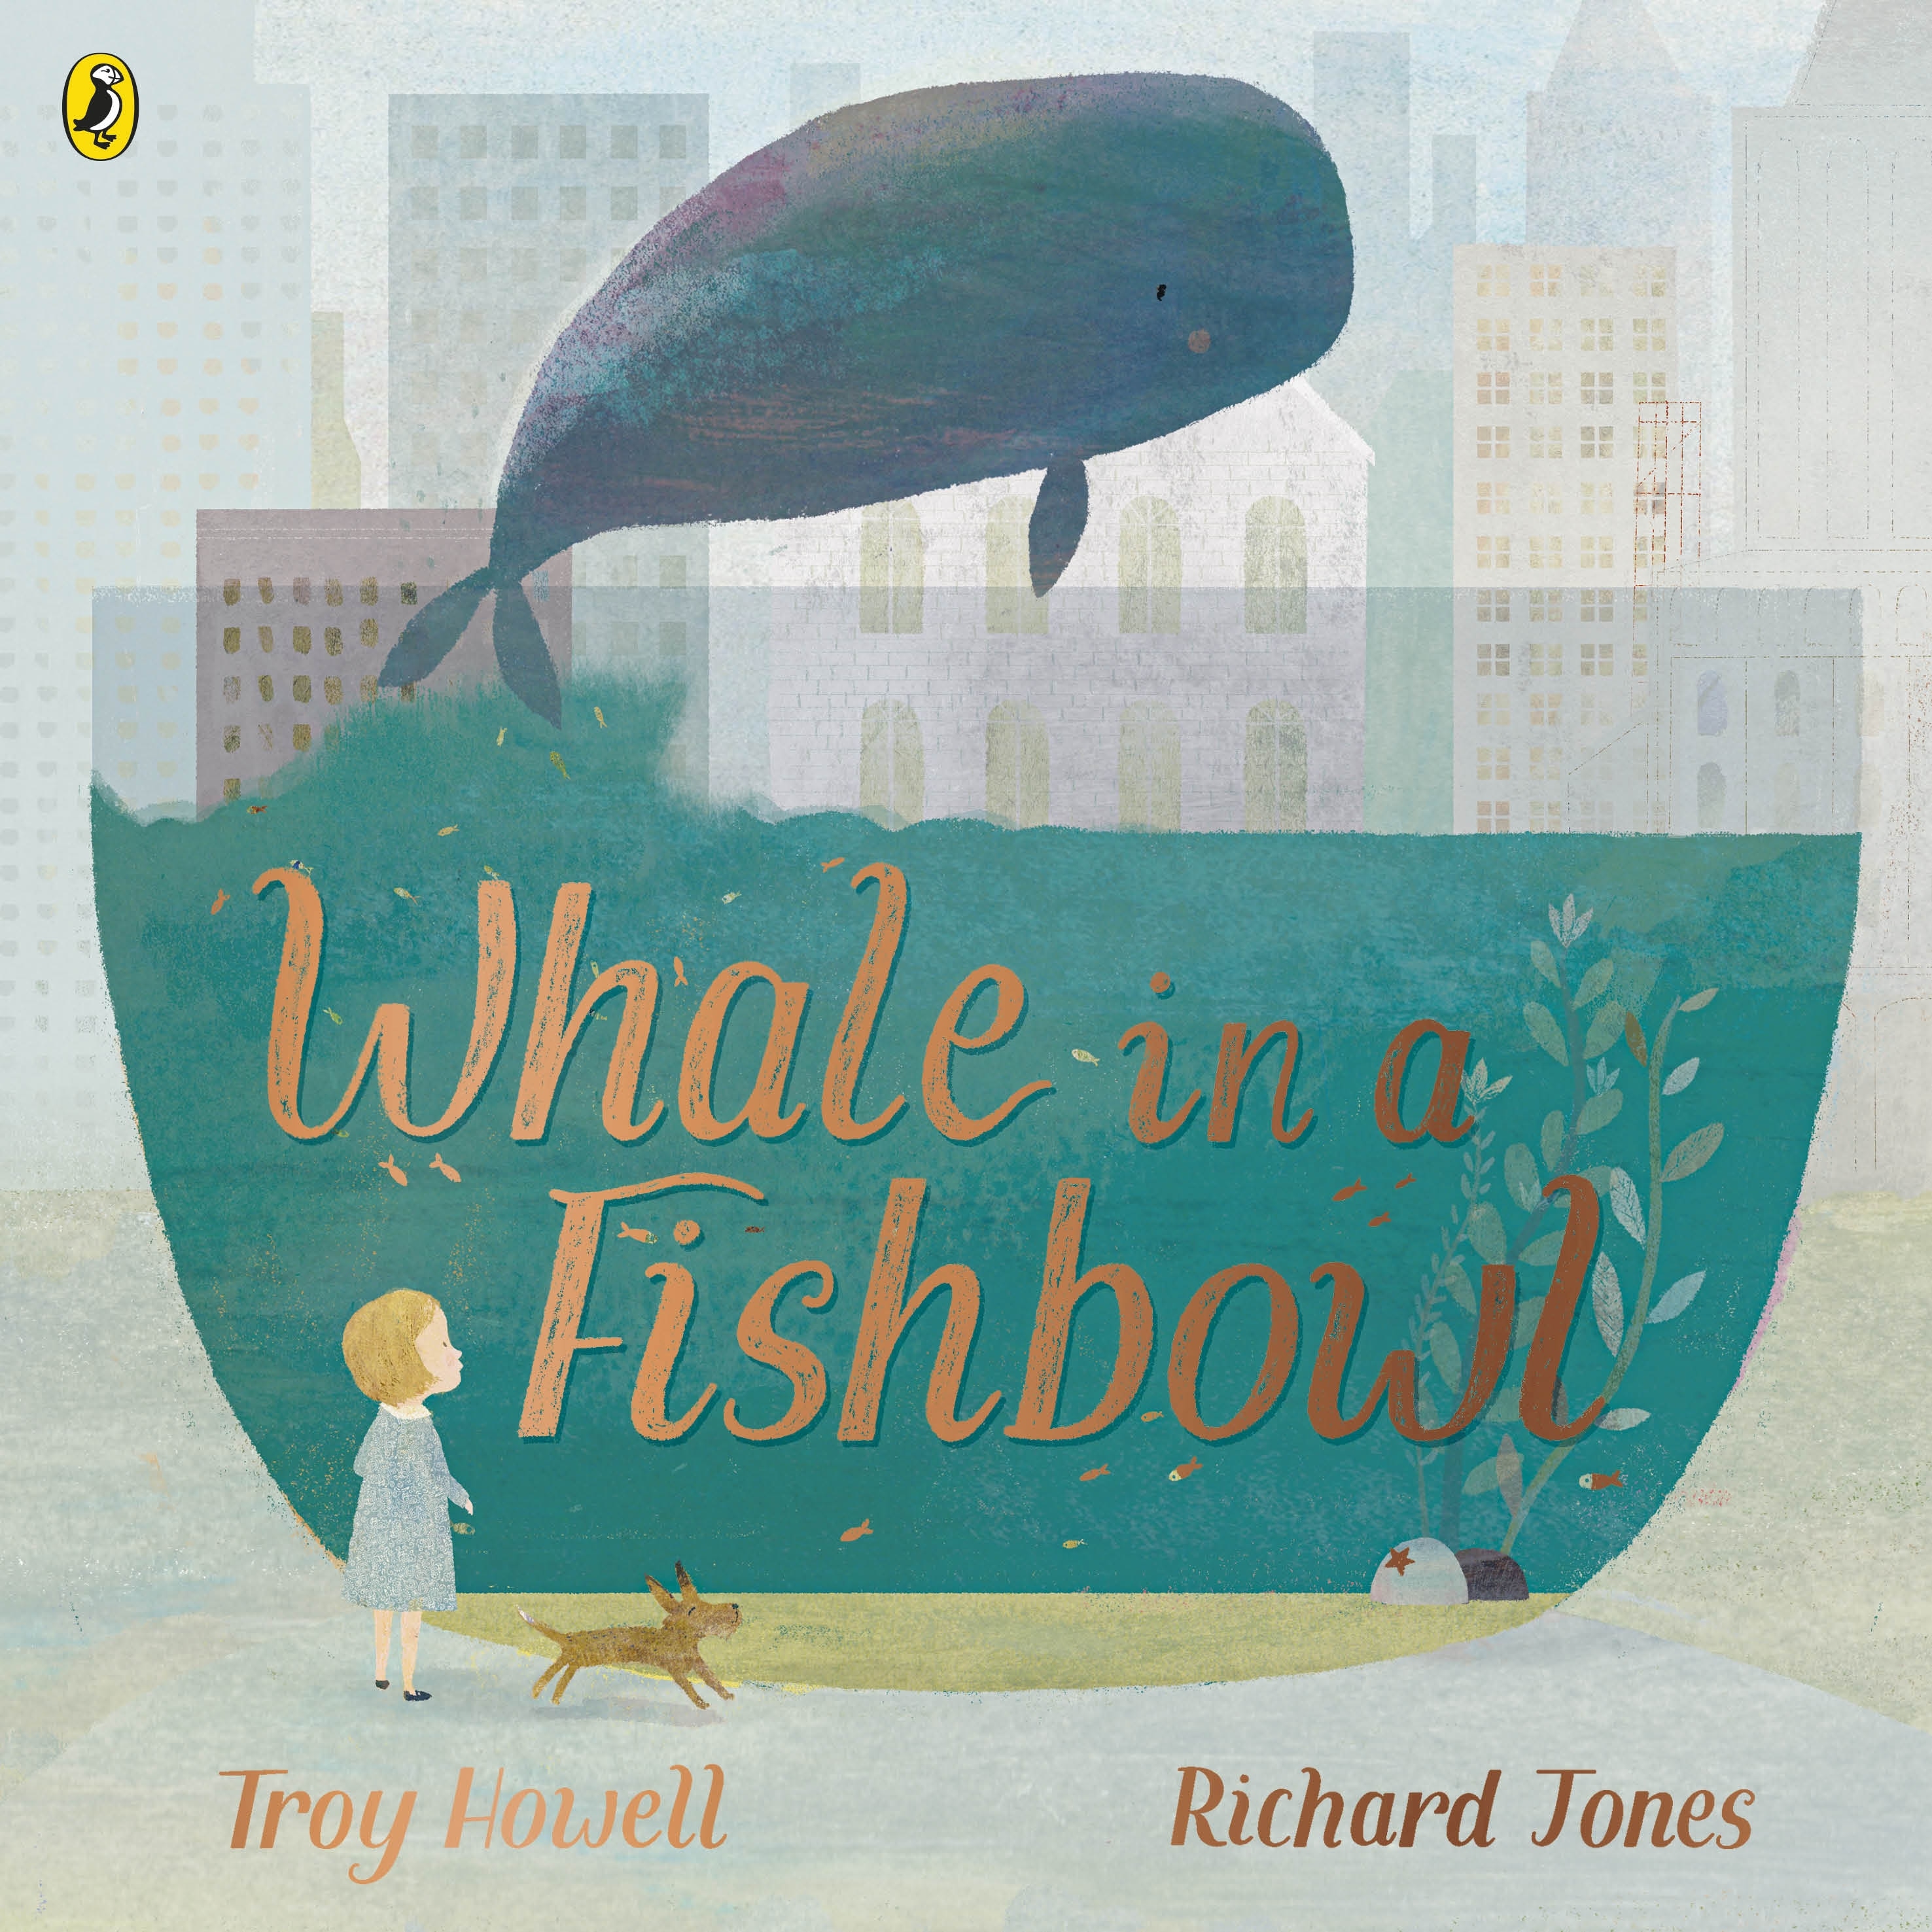 Book “Whale in a Fishbowl” by Troy Howell, Richard Jones — September 9, 2021